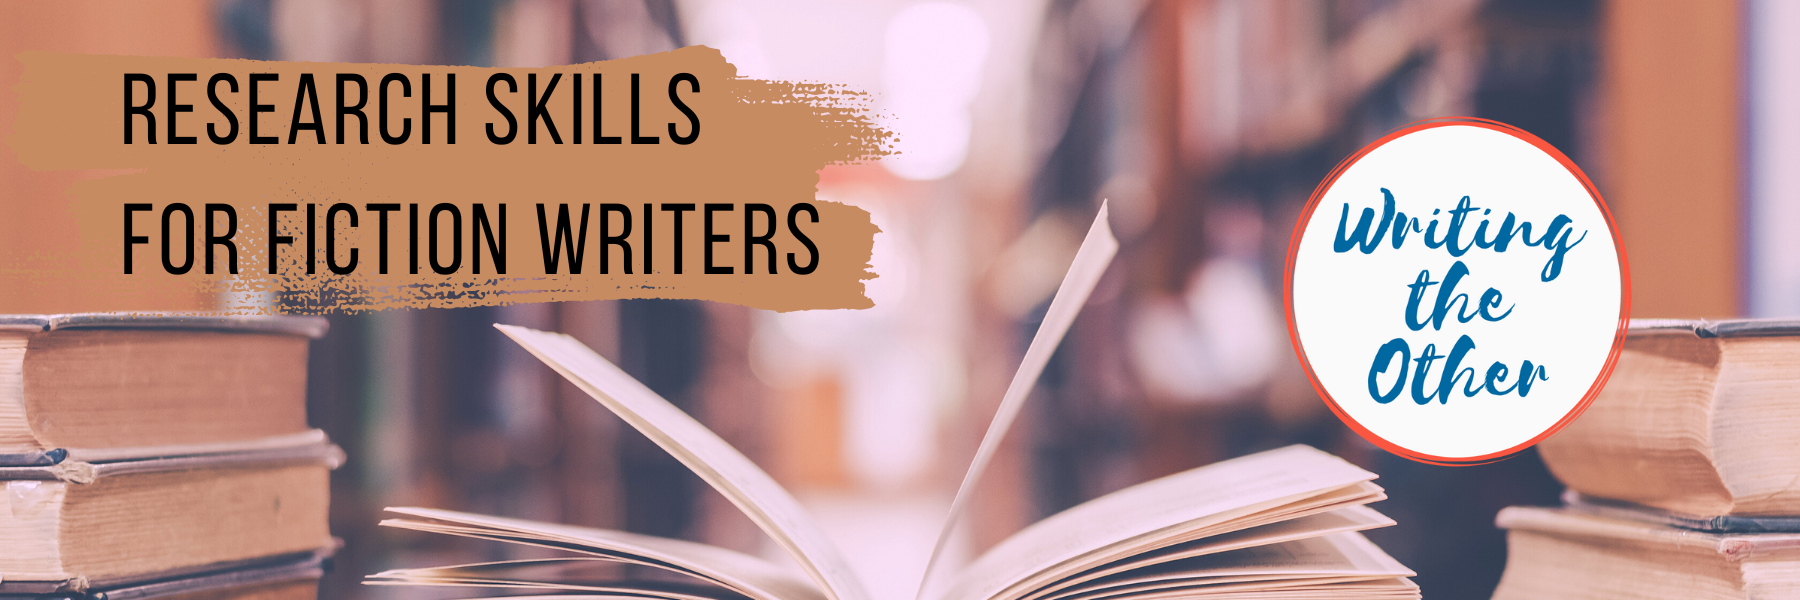 Research Skills for Fiction Writers On Demand